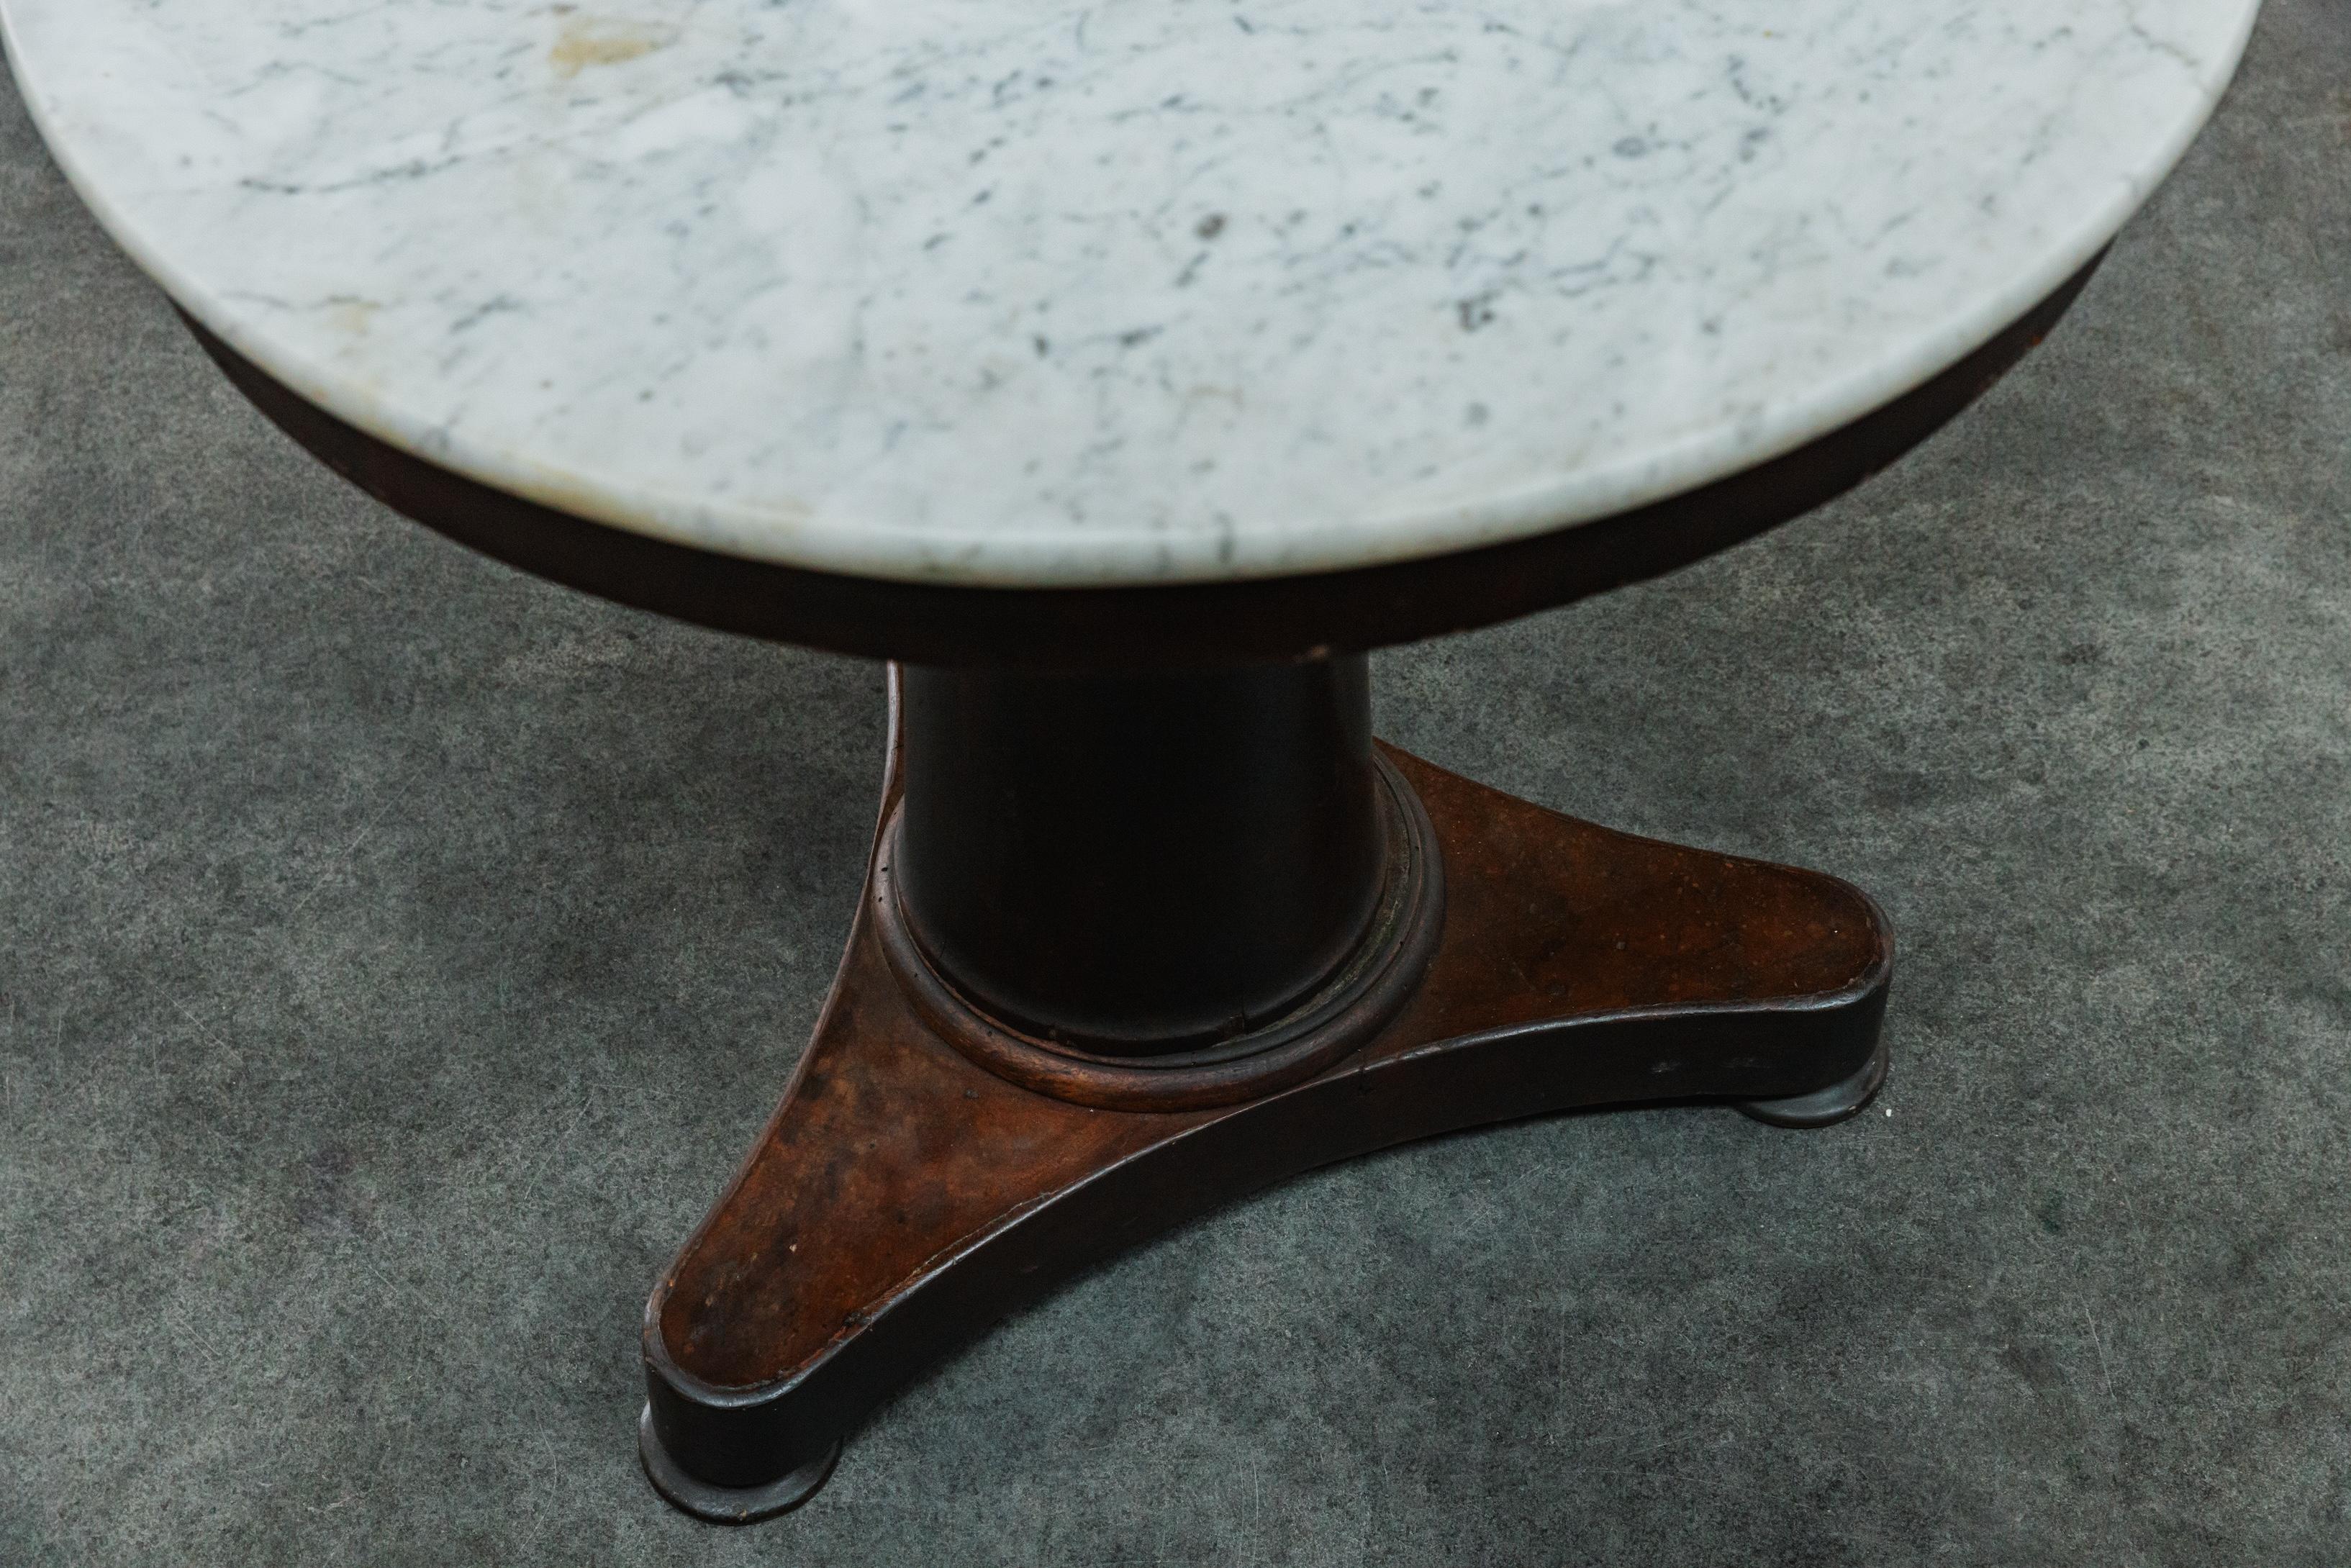 Vintage Marble Empire Table From France, Circa 1900.  Mahogany base with original white marble top.  Nice wear and use.